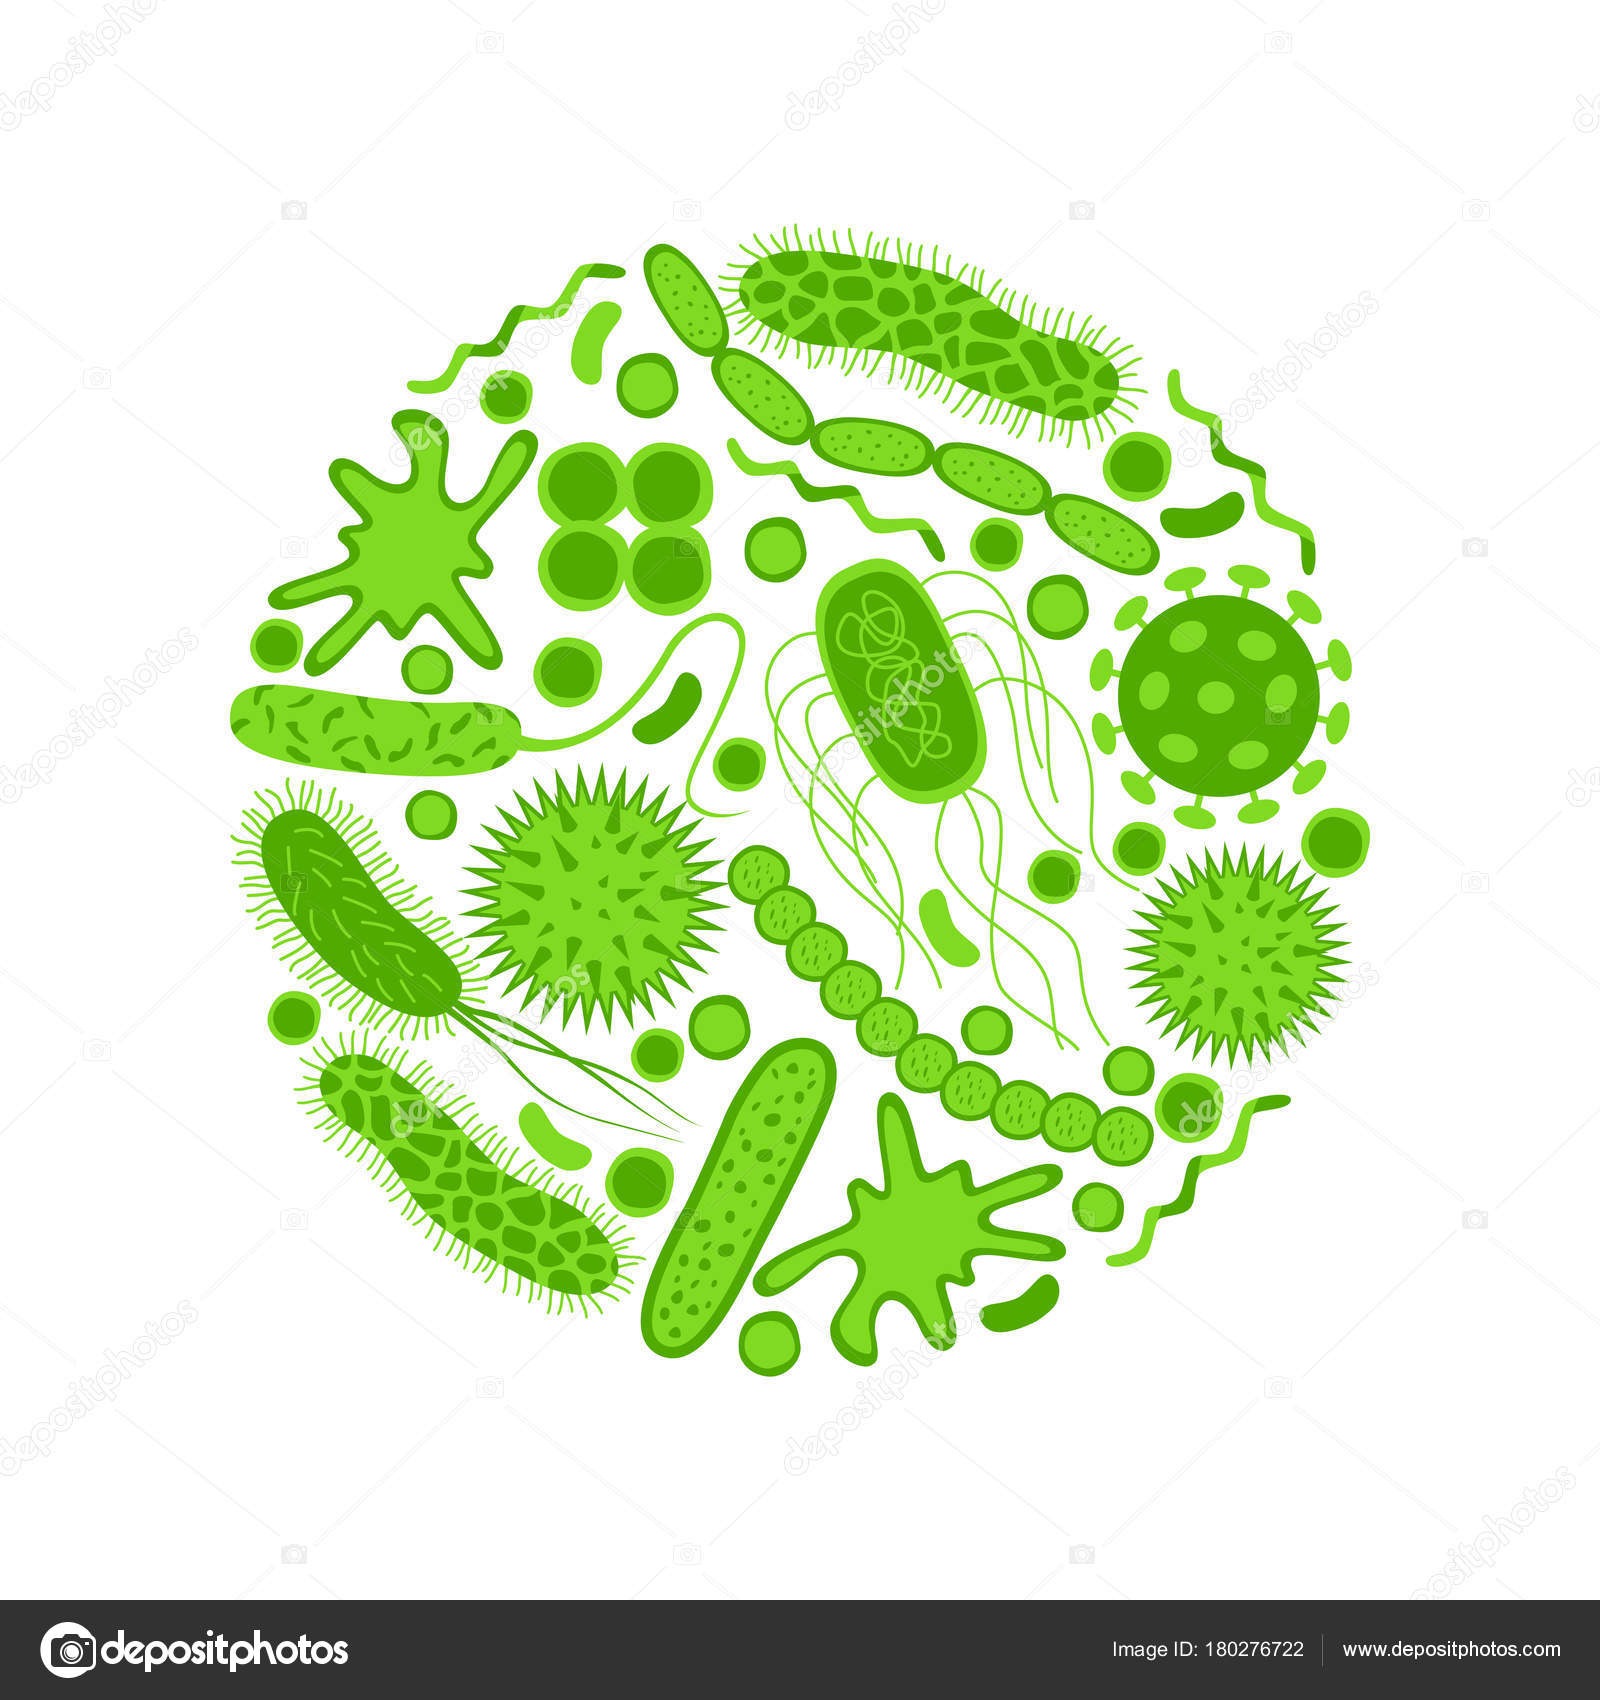 Green germs and bacteria icons set isolated on white background ...